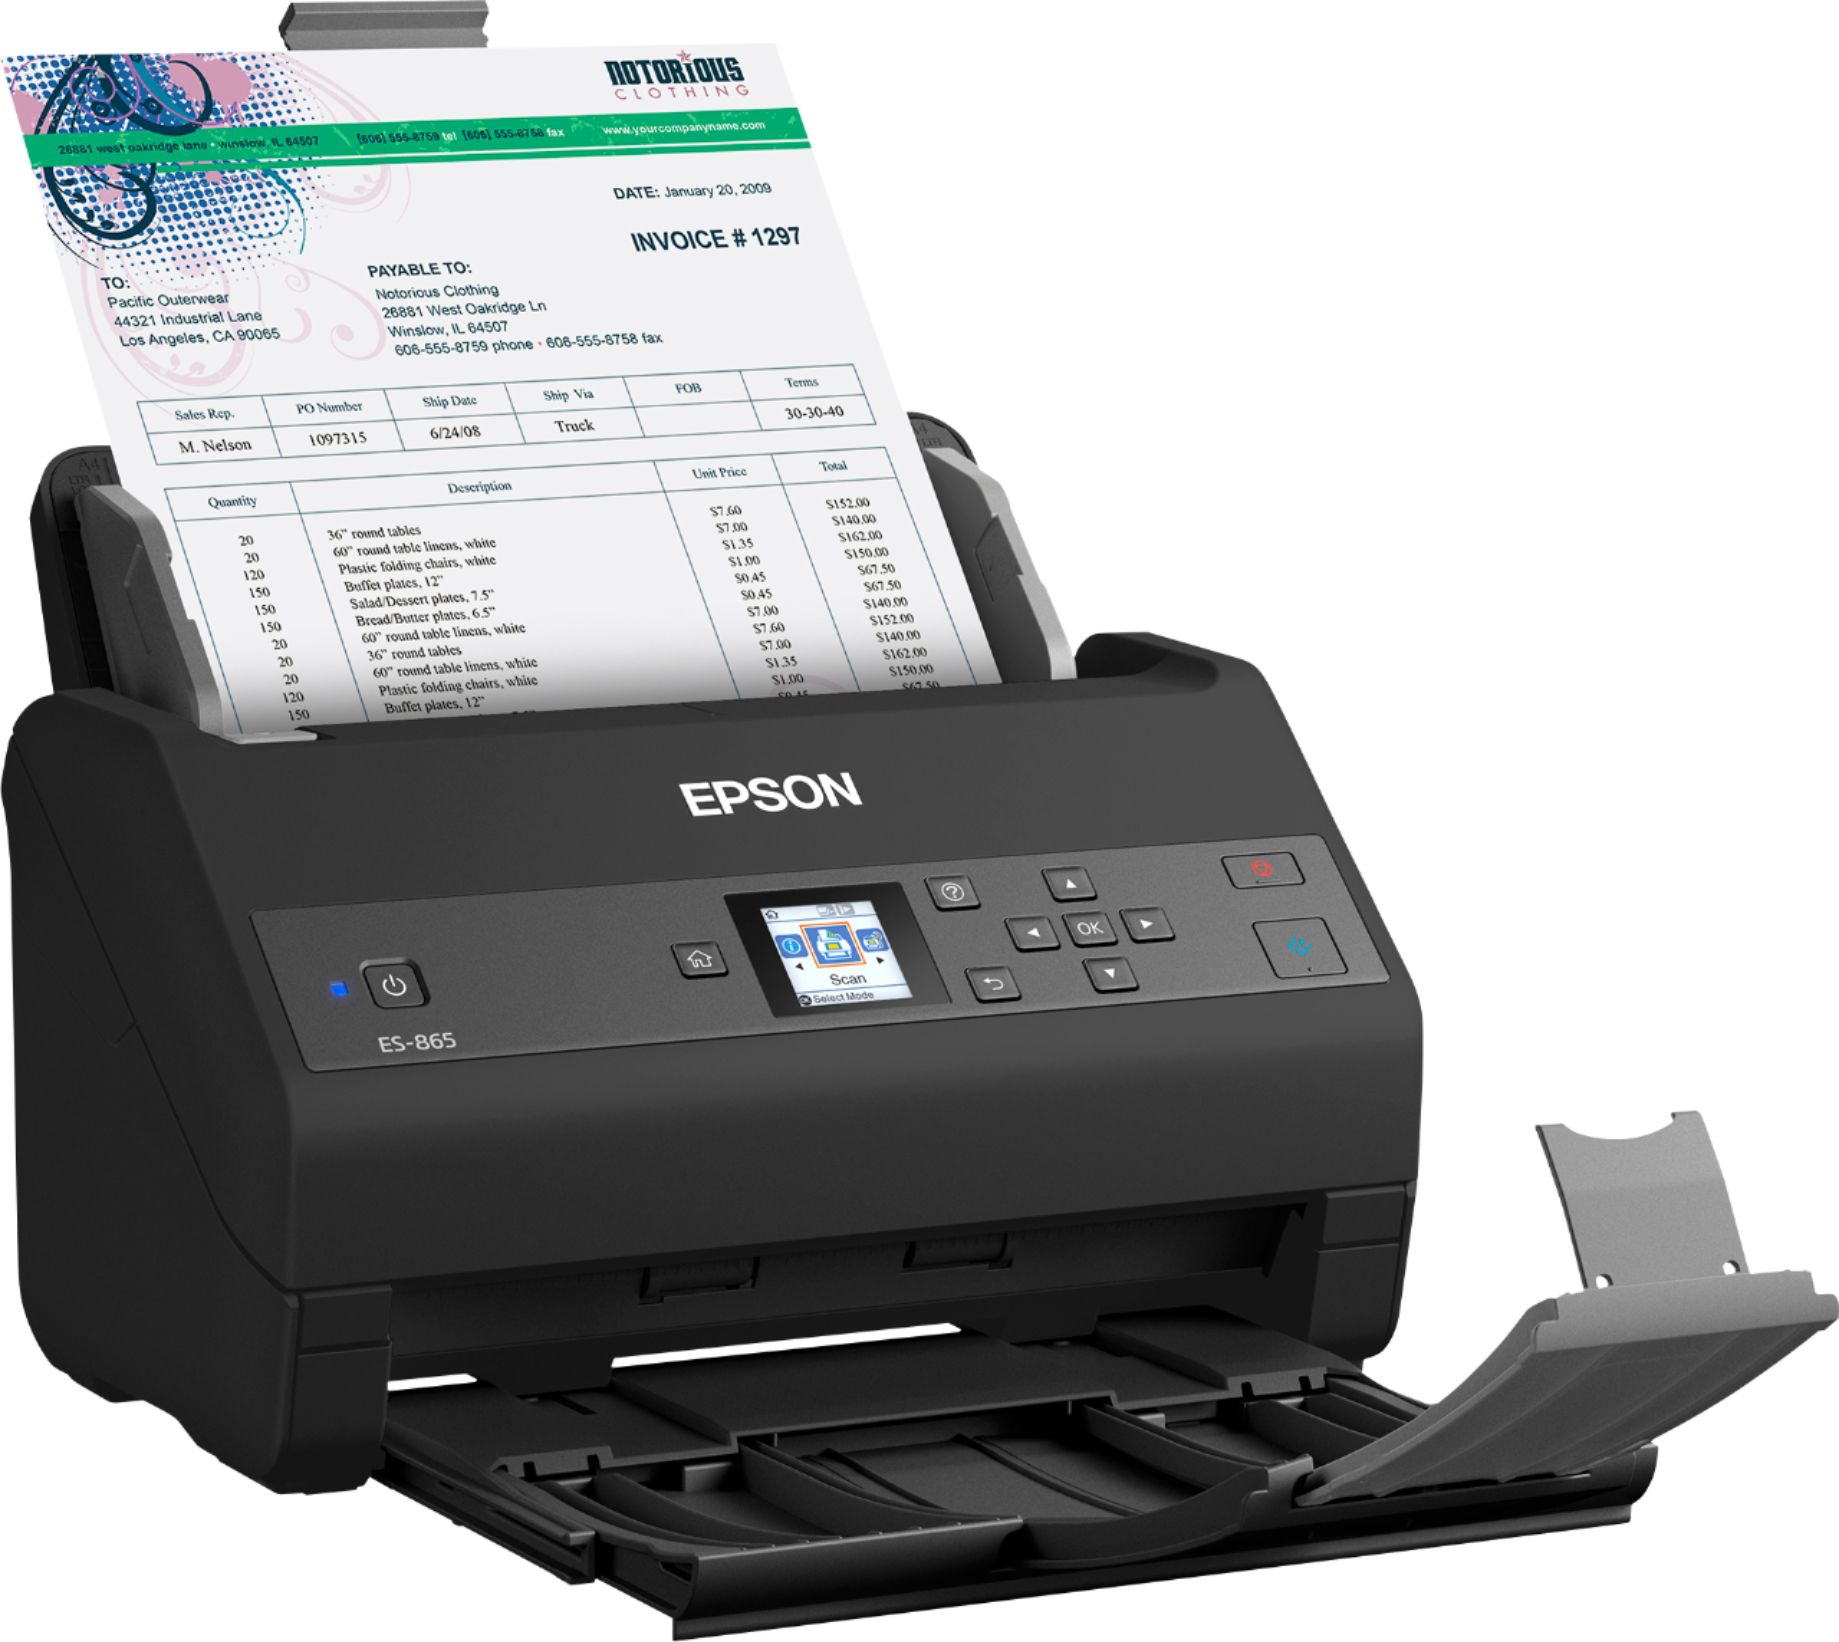 Angle View: Canon - imageFORMULA DR-C230 Office Document Scanner - Black